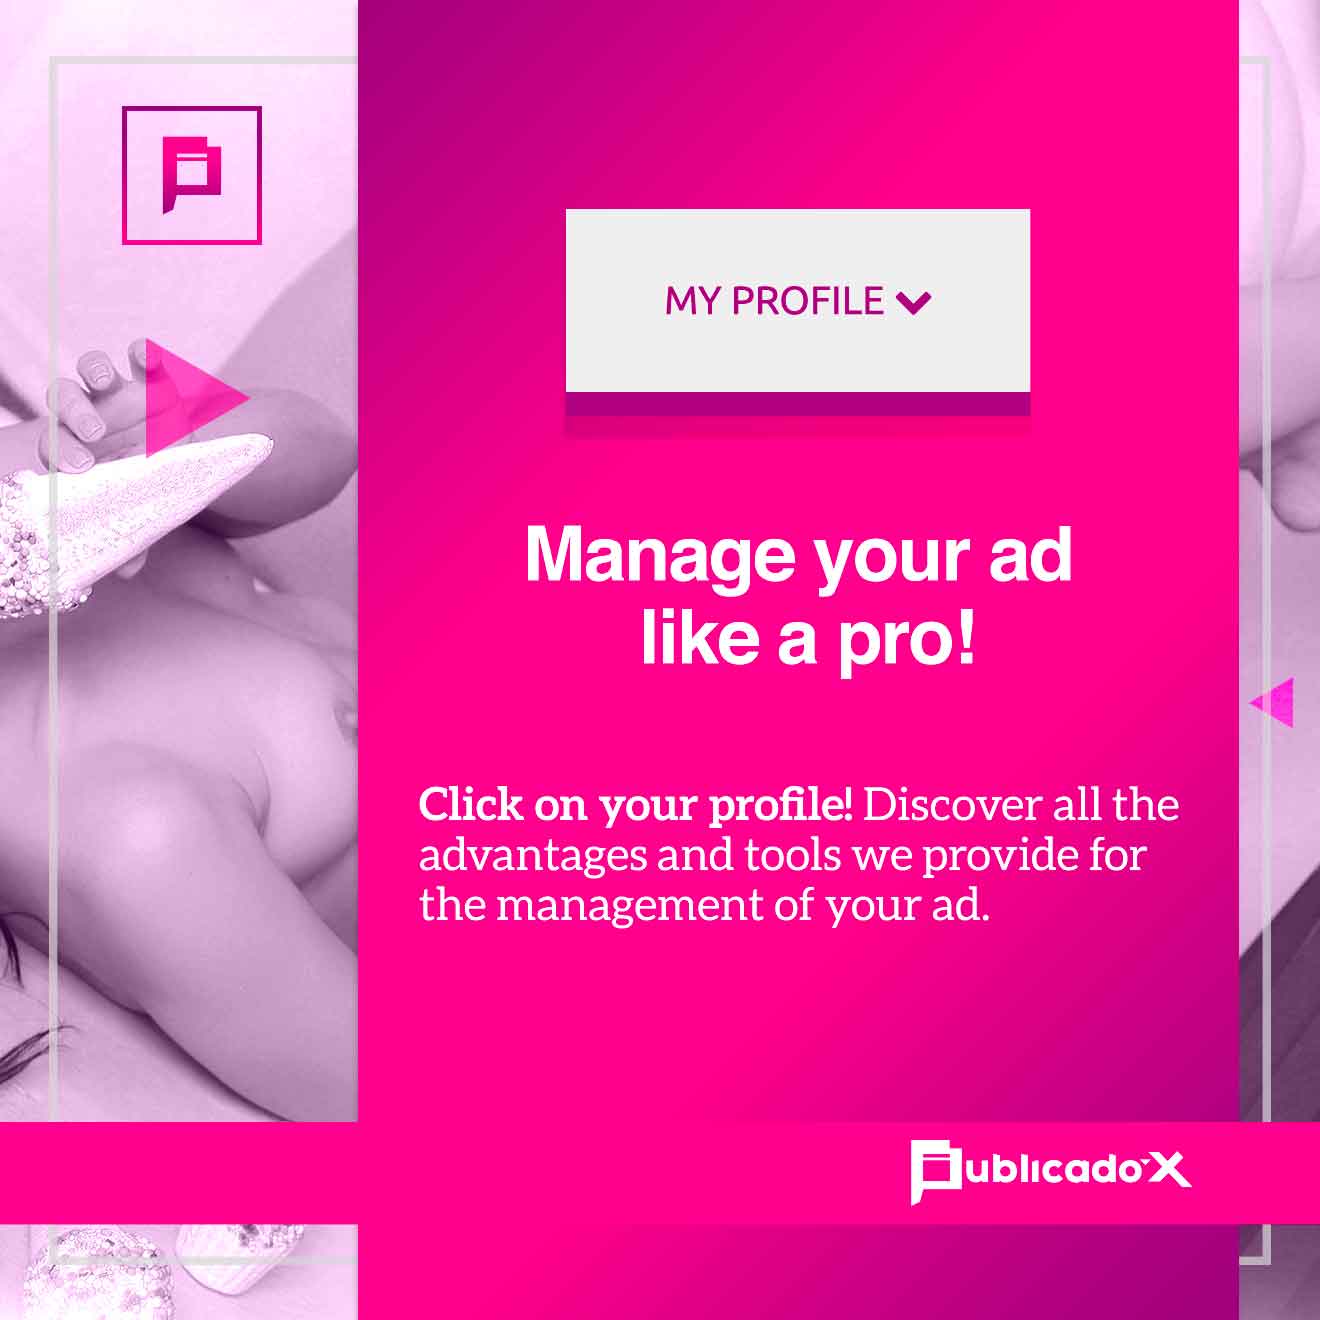 Click on your profile! Find out about all the advantages and tools we provide for managing your ad.